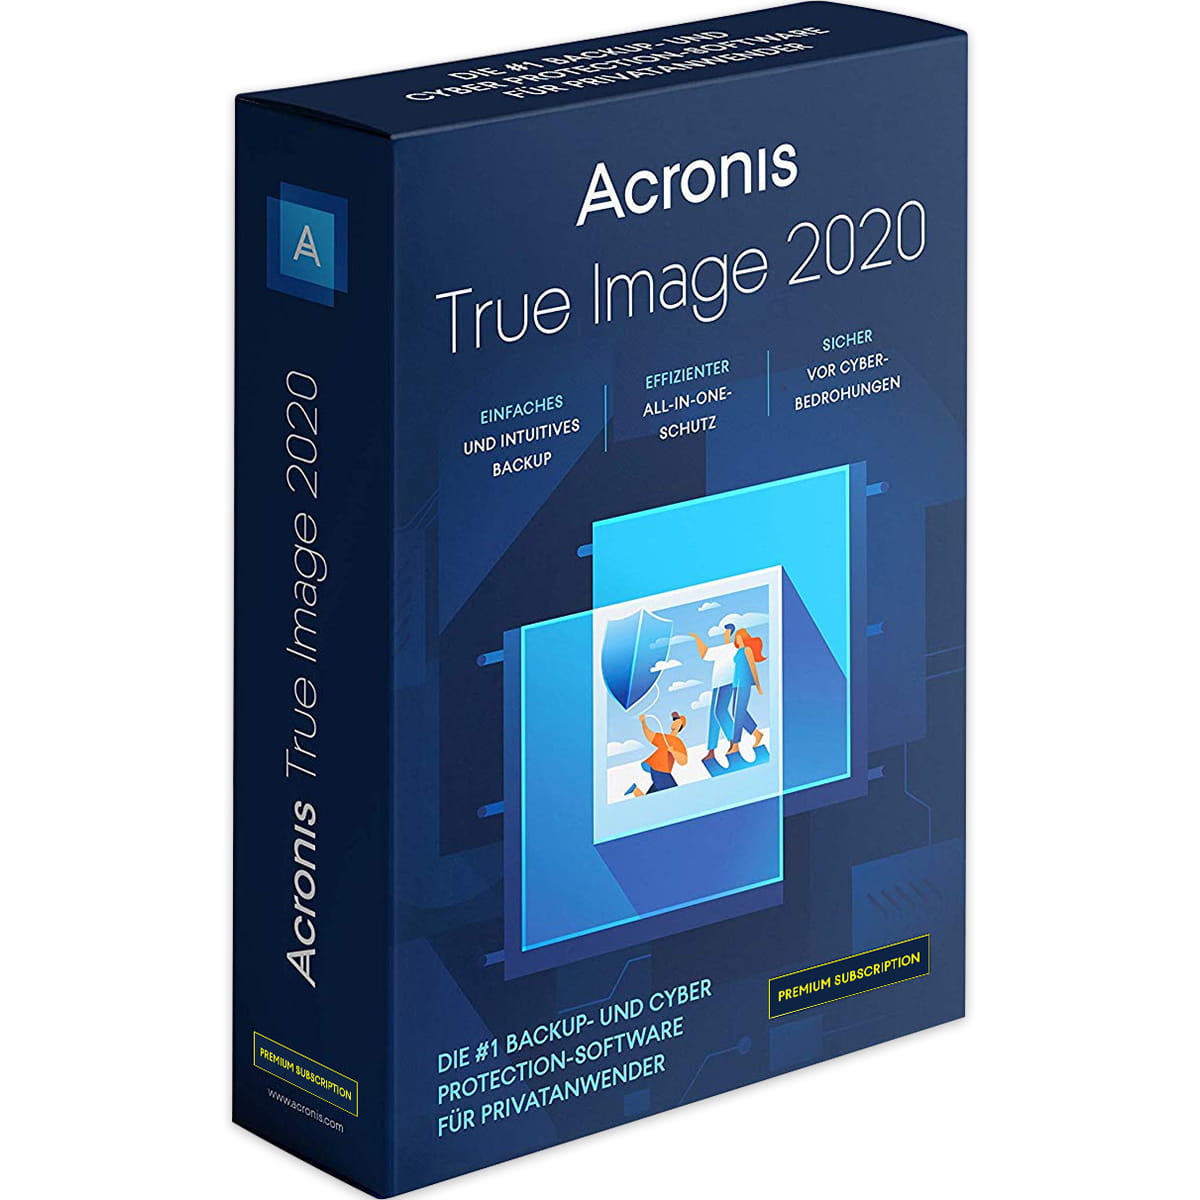 Bitdefender Total Security 2020 with Acronis True Image 2019